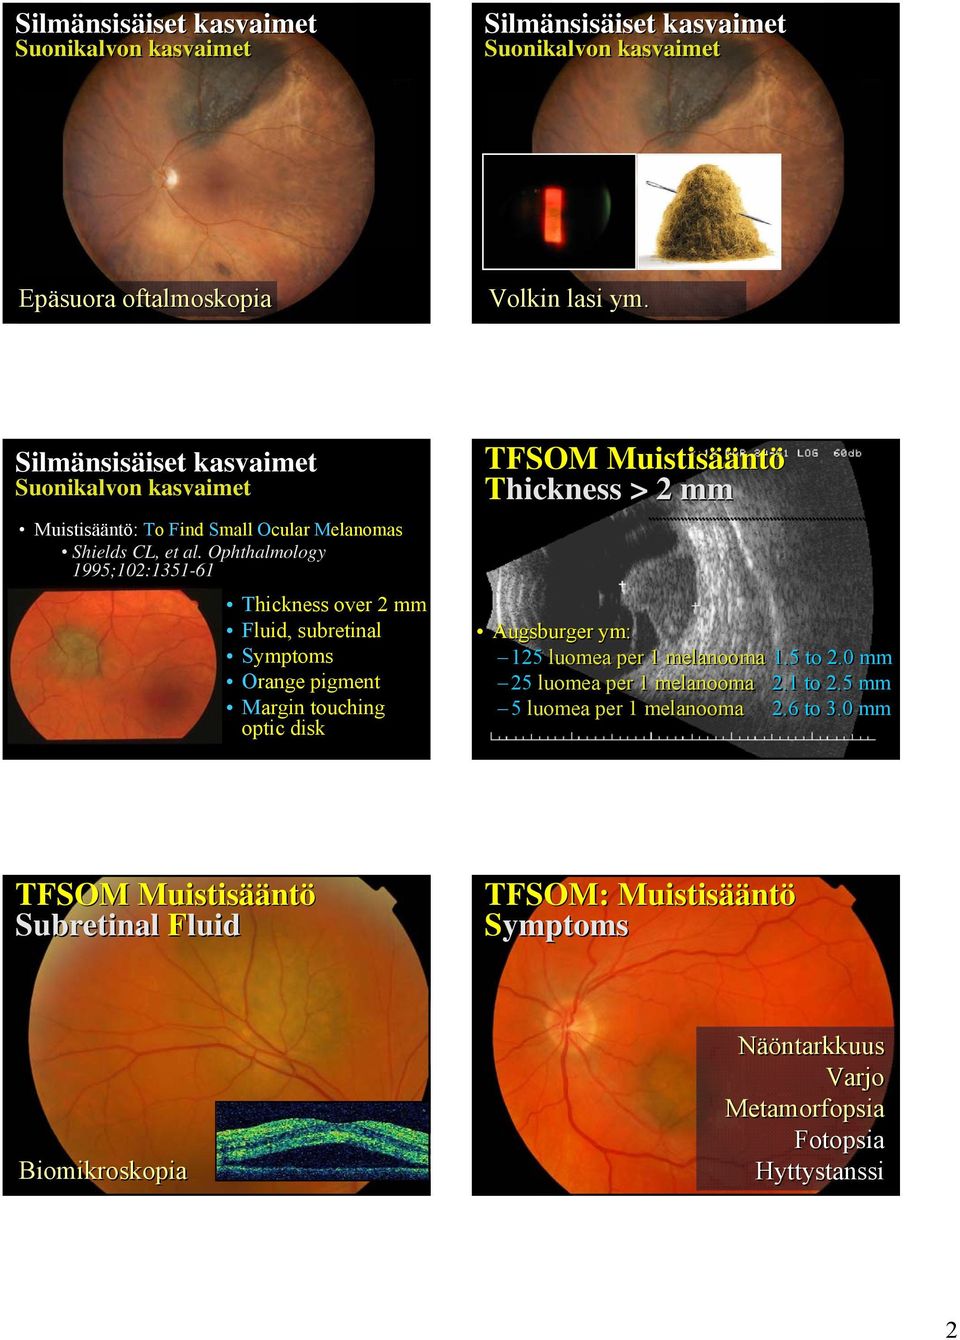 Ophthalmology 1995;102:1351-61 Thickness over 2 mm Fluid, subretinal Symptoms Orange pigment Margin touching optic disk TFSOM Muistisääntö Thickness > 2 mm Augsburger